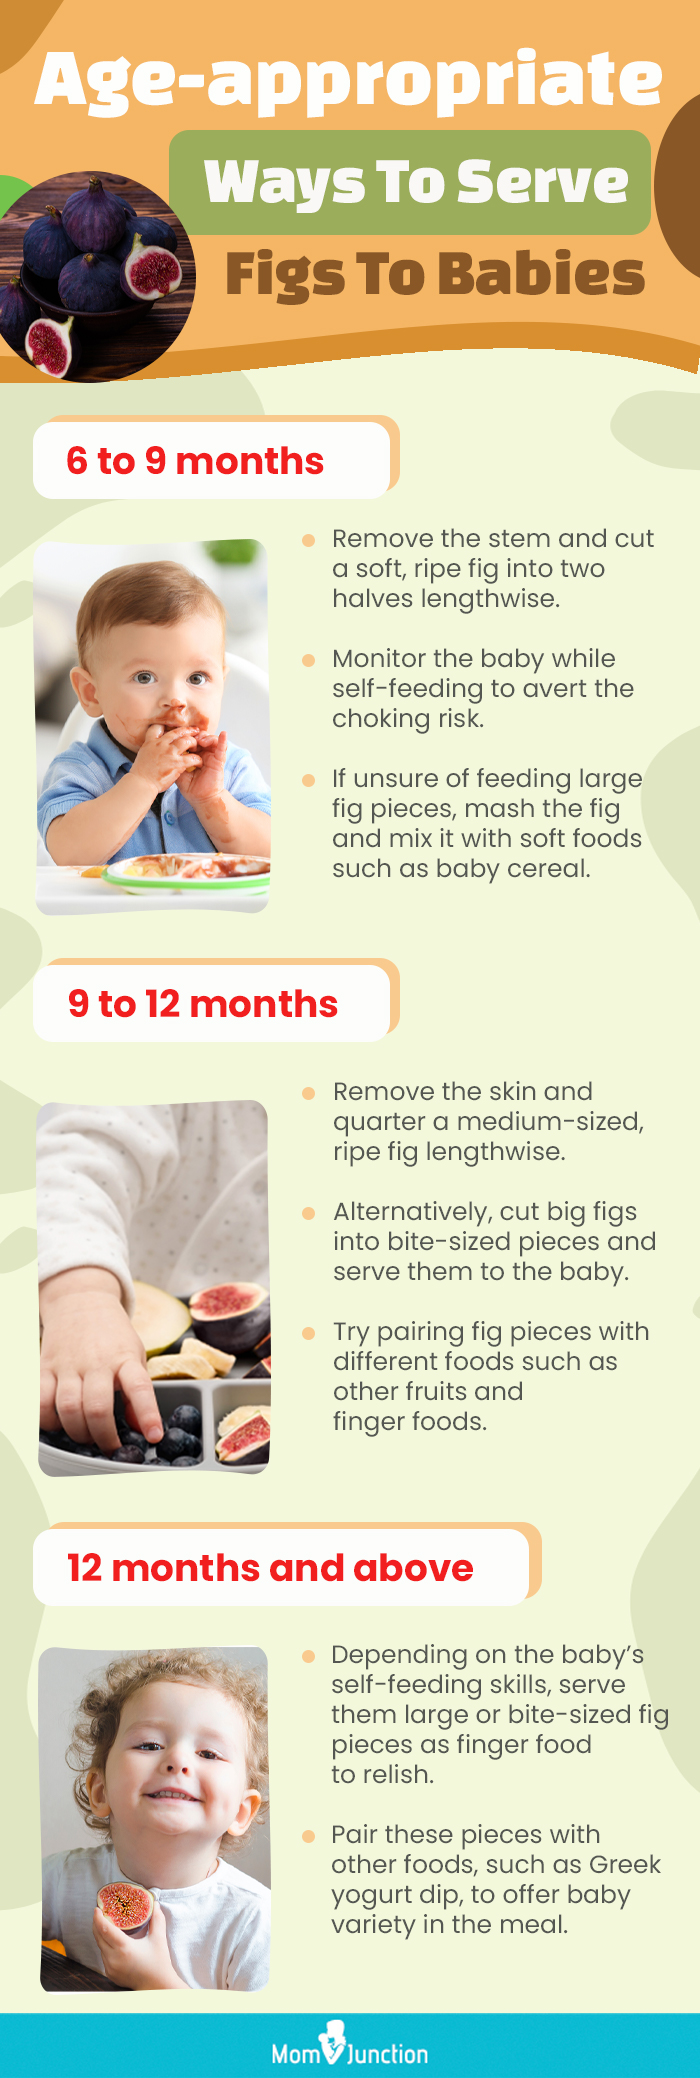 age appropriate ways to serve figs to babies (infographic)